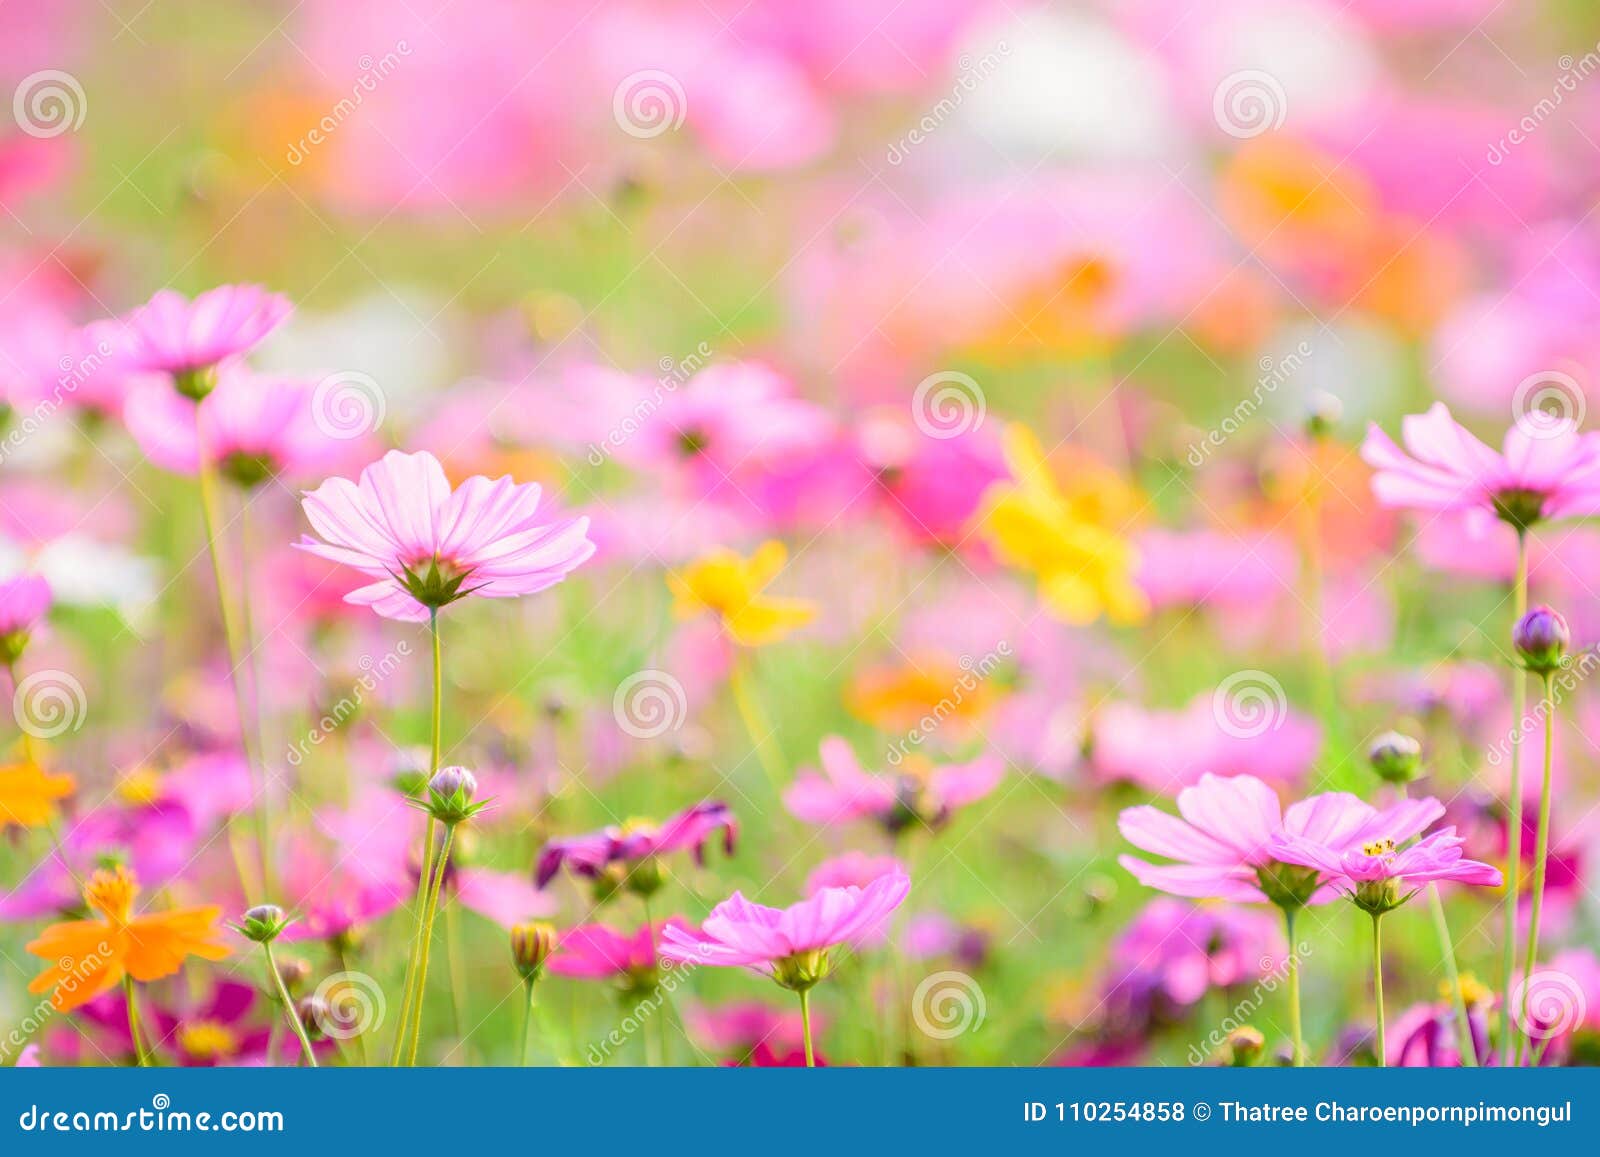 Close Up Fo Cosmos Flowers with Blur Background in the Garden. Stock Photo  - Image of flower, cosmos: 110254858